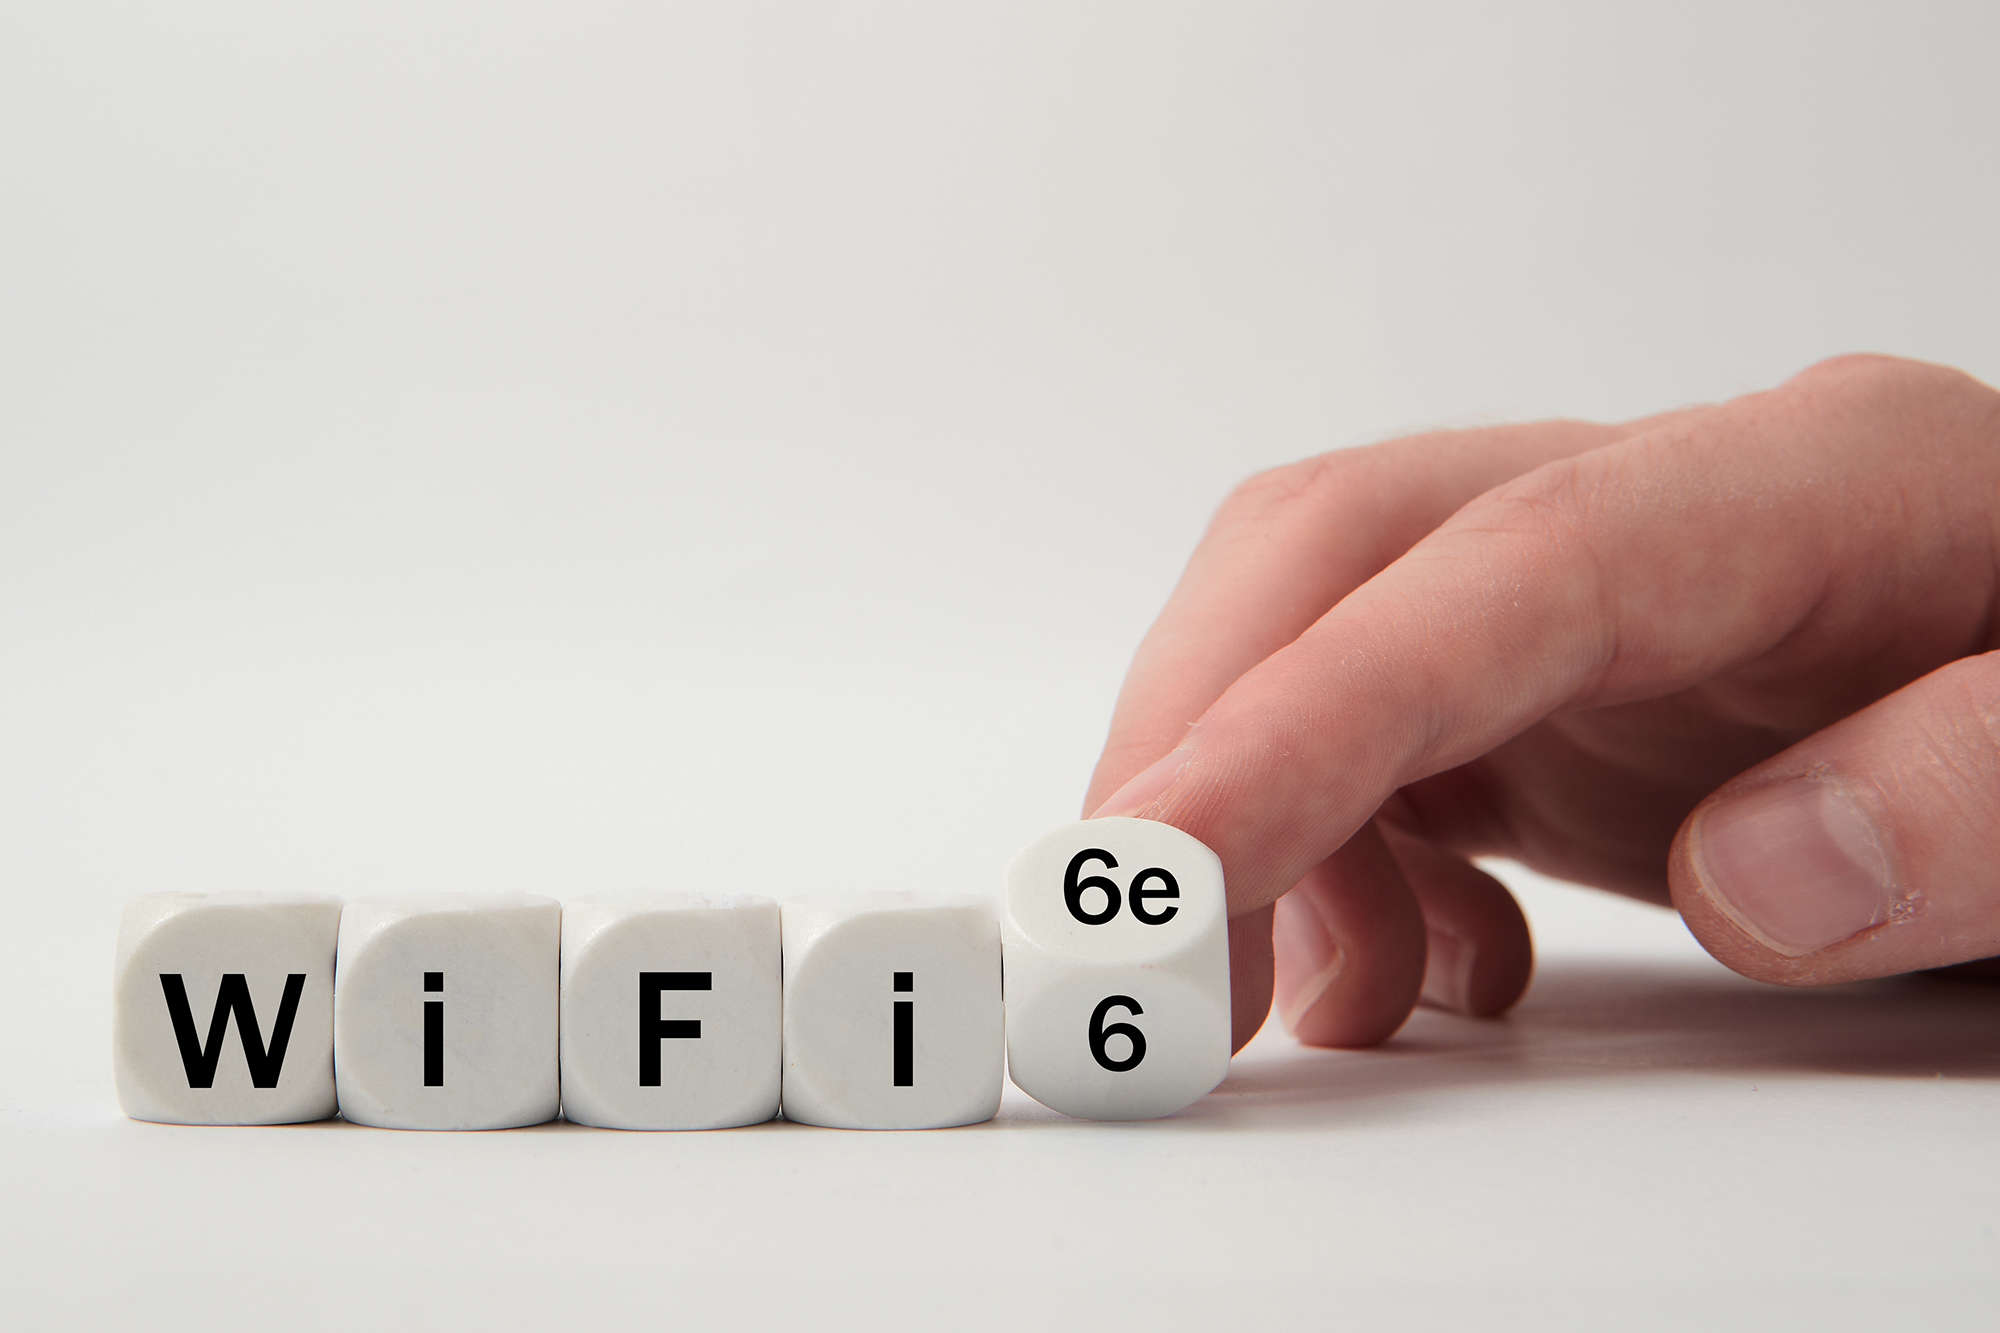 Person flipping a die to 6e in a collection of dice that read WiFi 6 